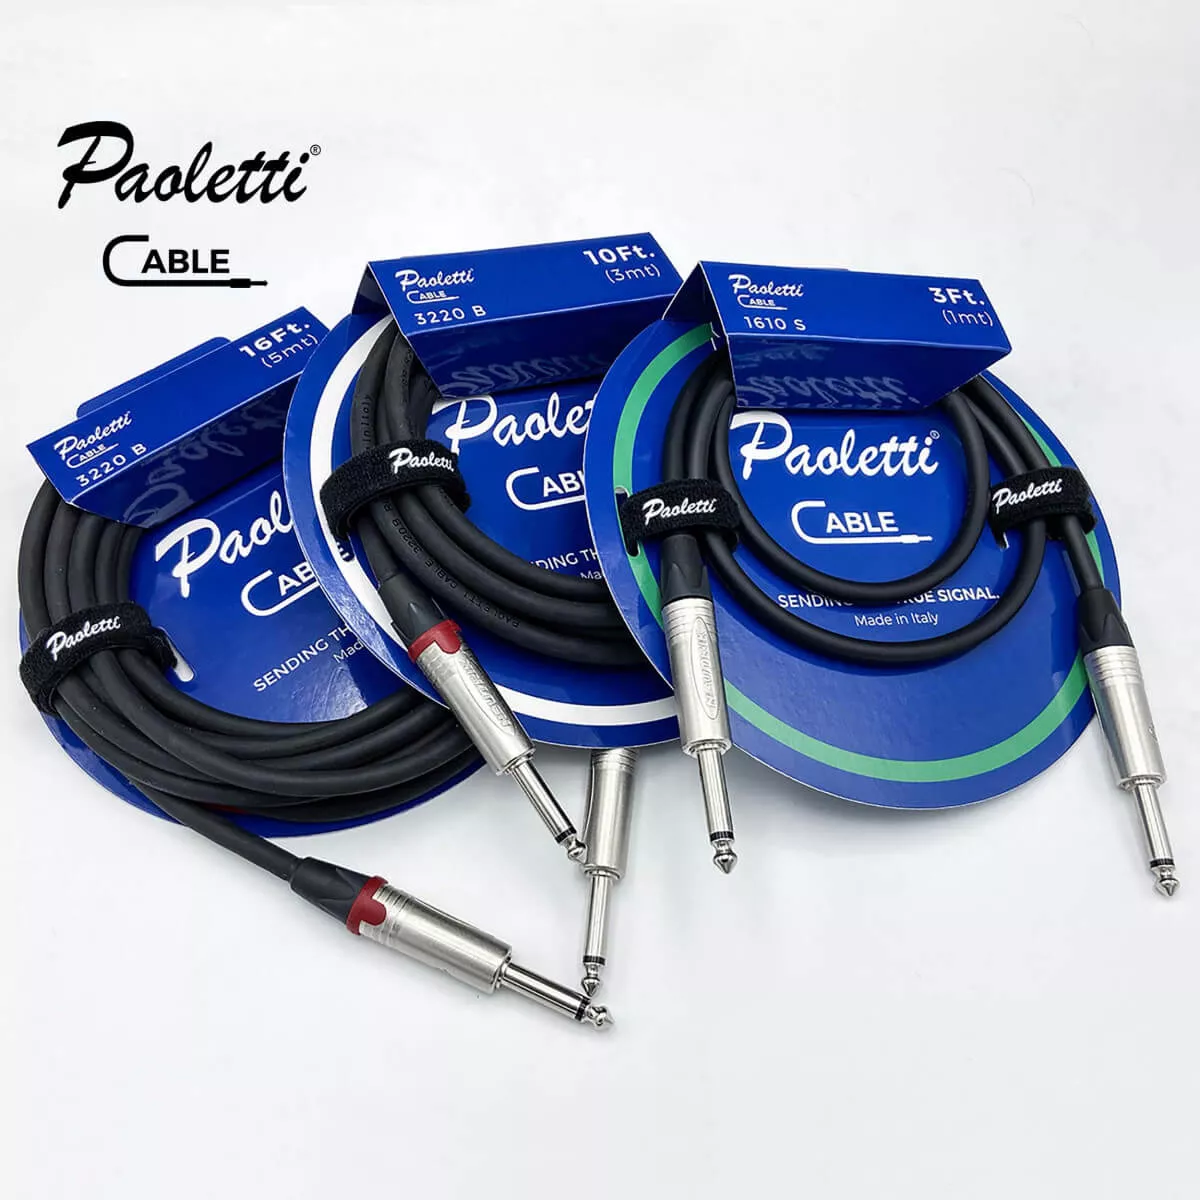 Handcrafted Premium Cable. By Paoletti.